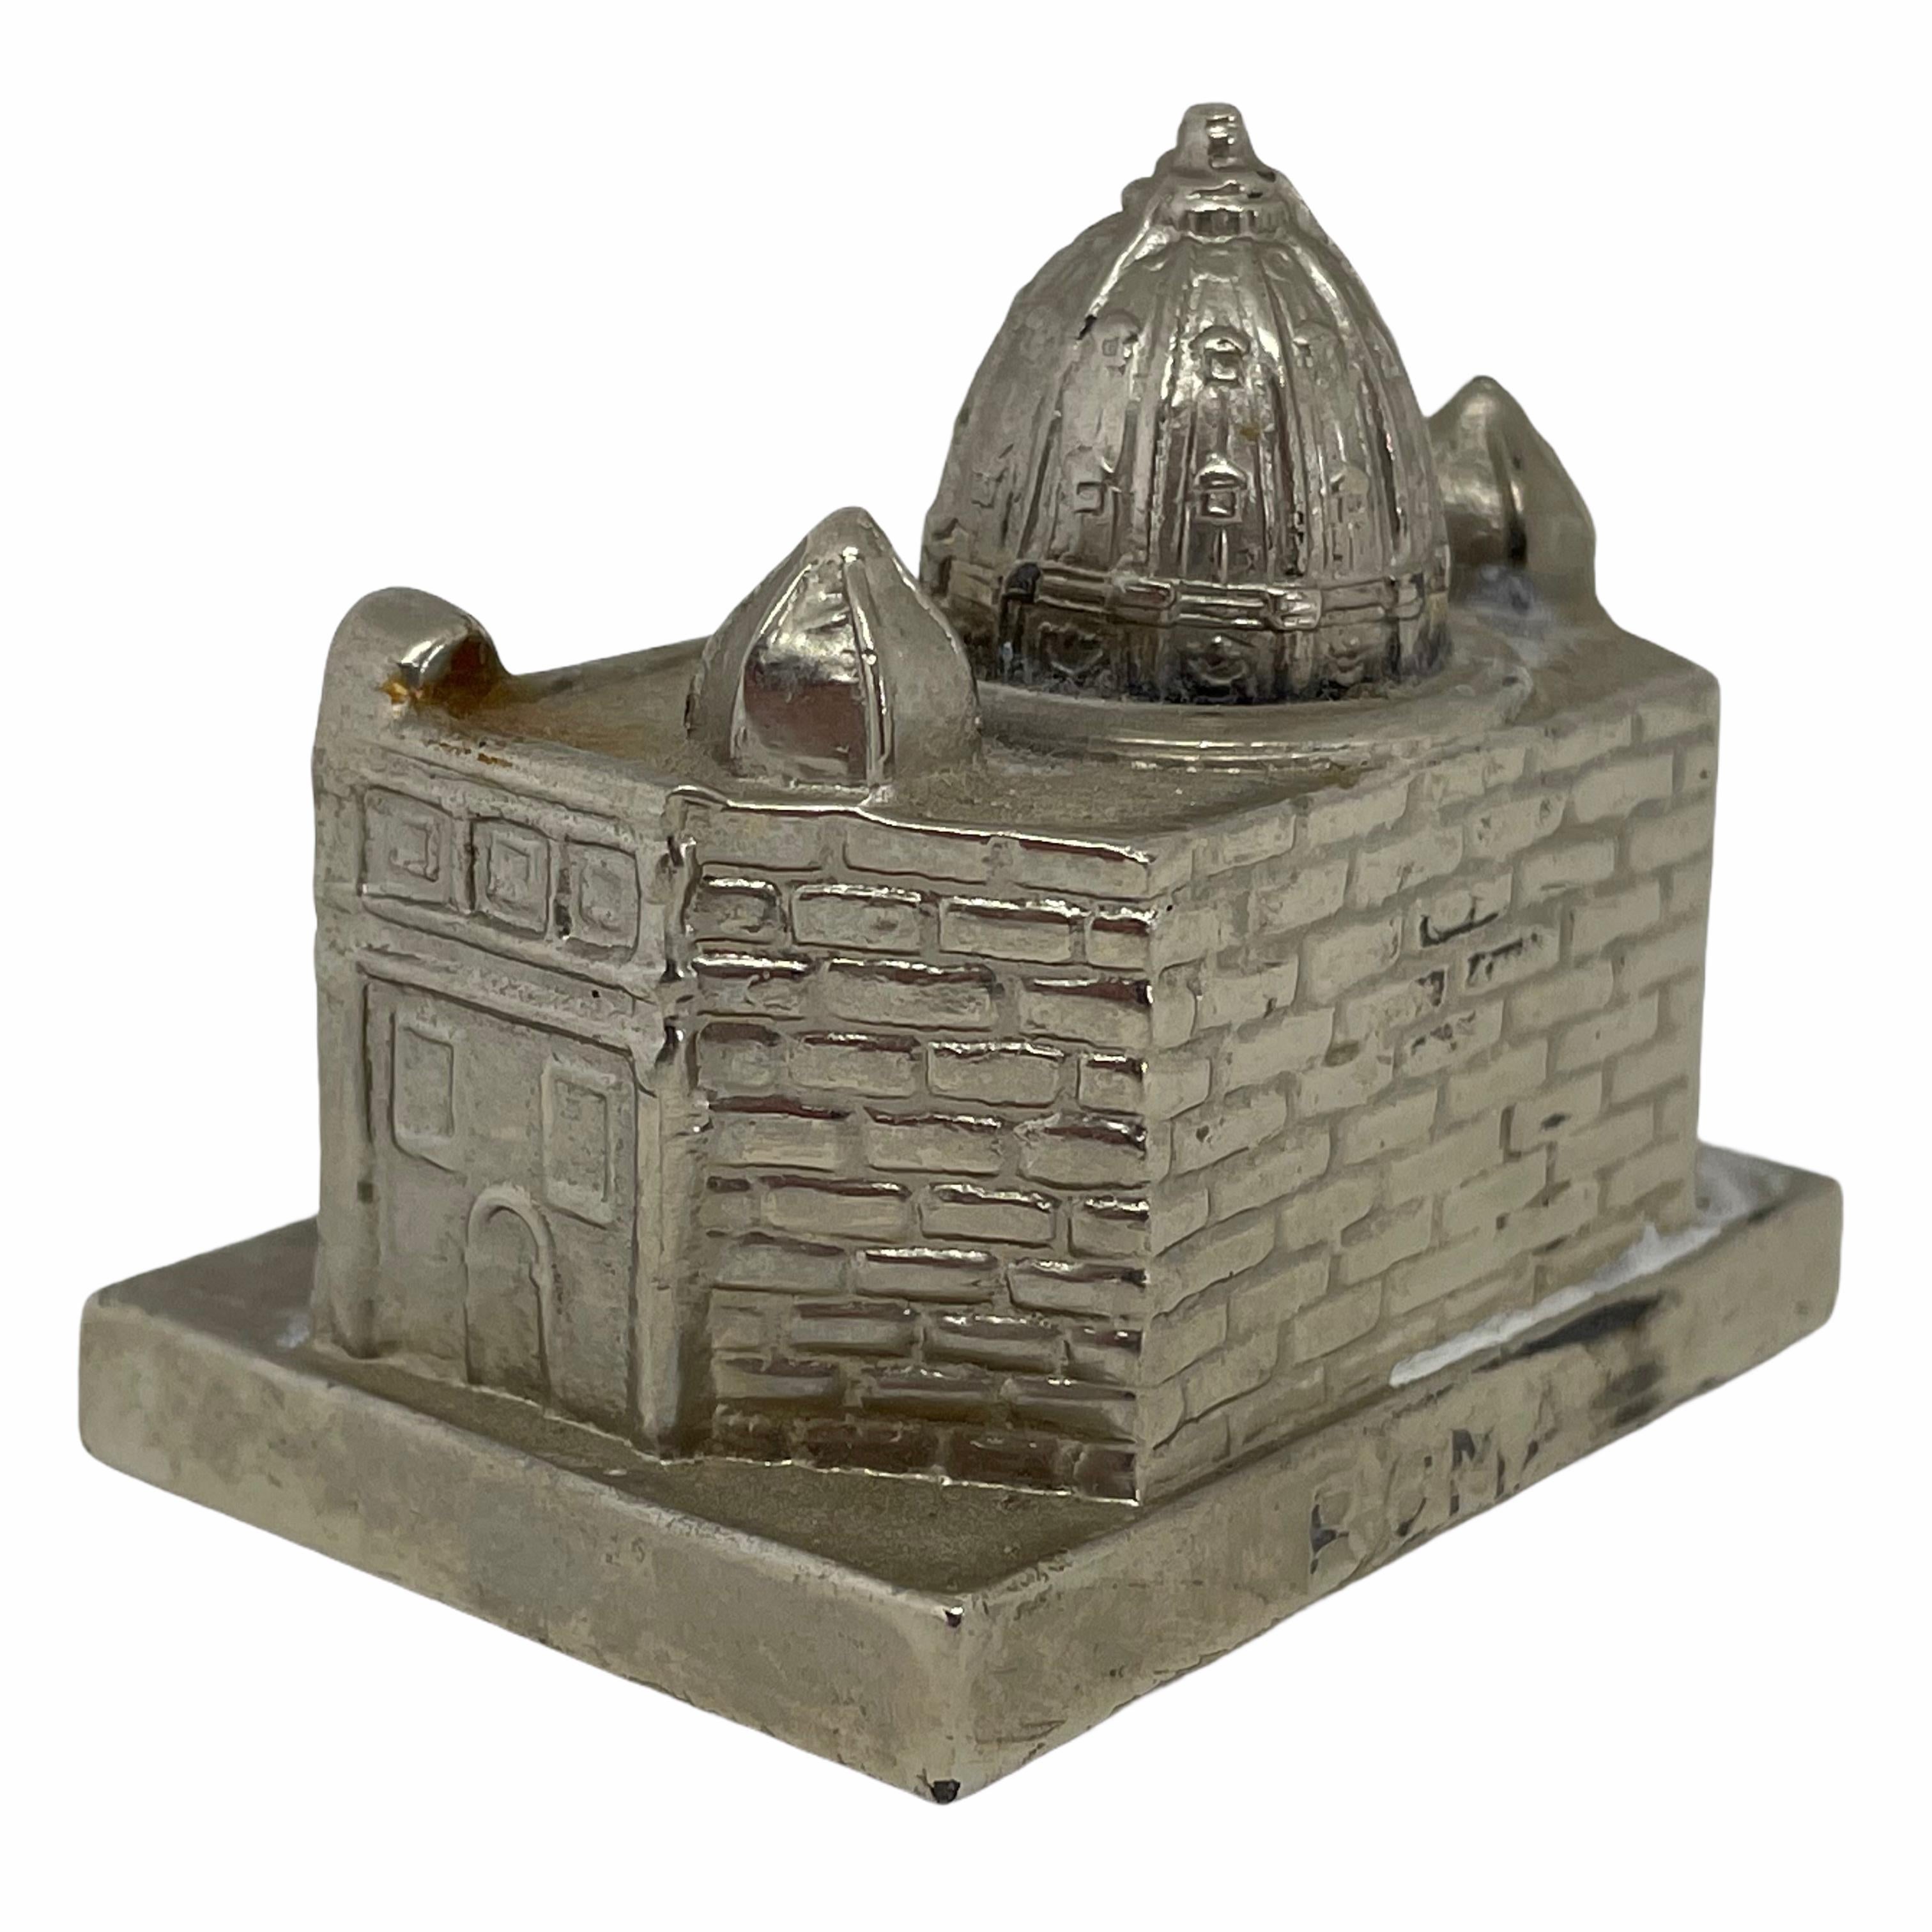 A 1960s souvenir building architectural model. Some wear with a nice patina, but this is old-age. Made of metal. A beautiful nice desktop item or just a display item in your collections of souvenirs from around the world.

 